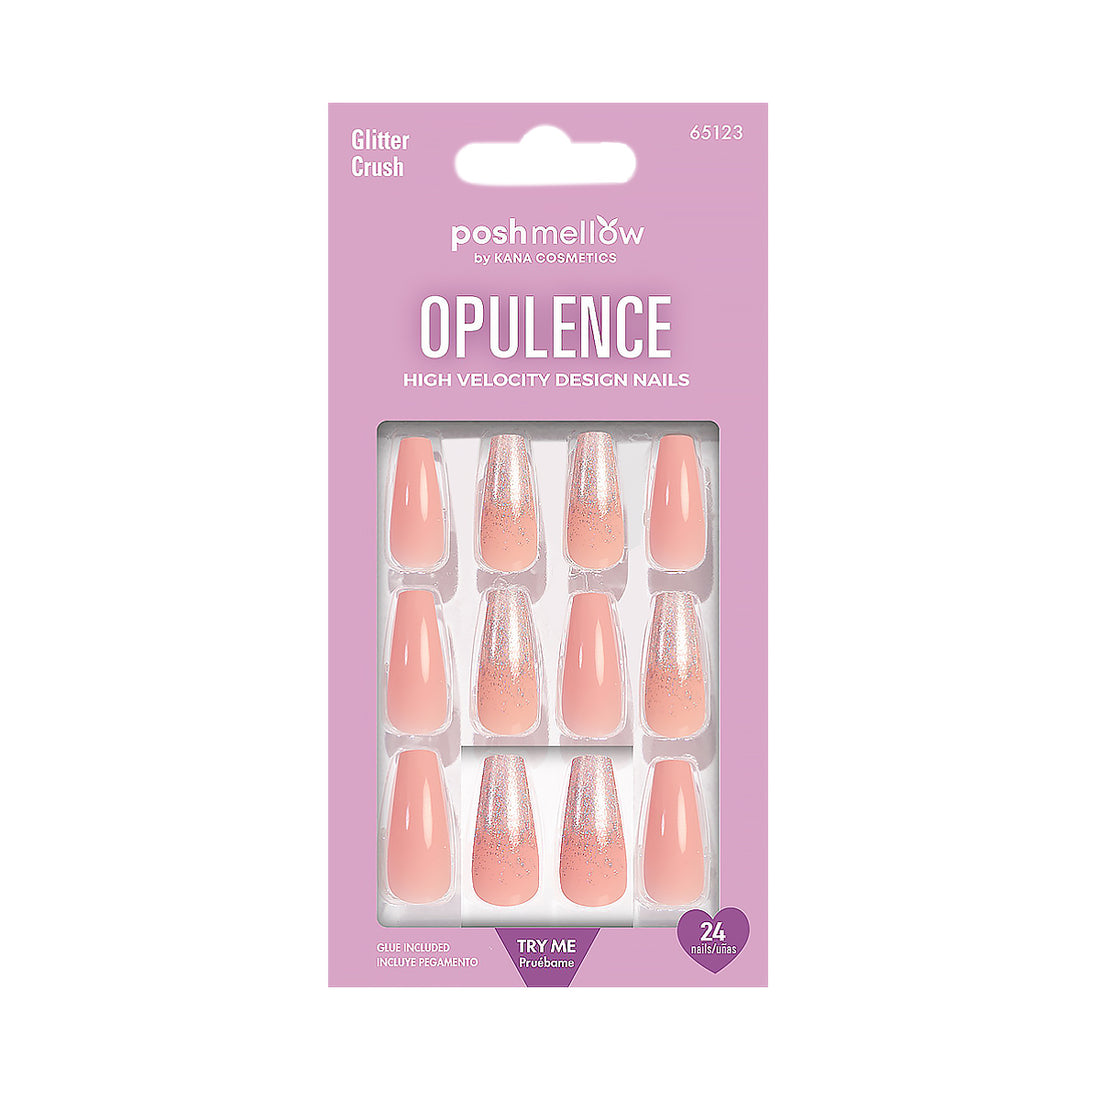 Tags: Pink Press On Nails with Glue Coffin Shaped Nails - Poshmellow